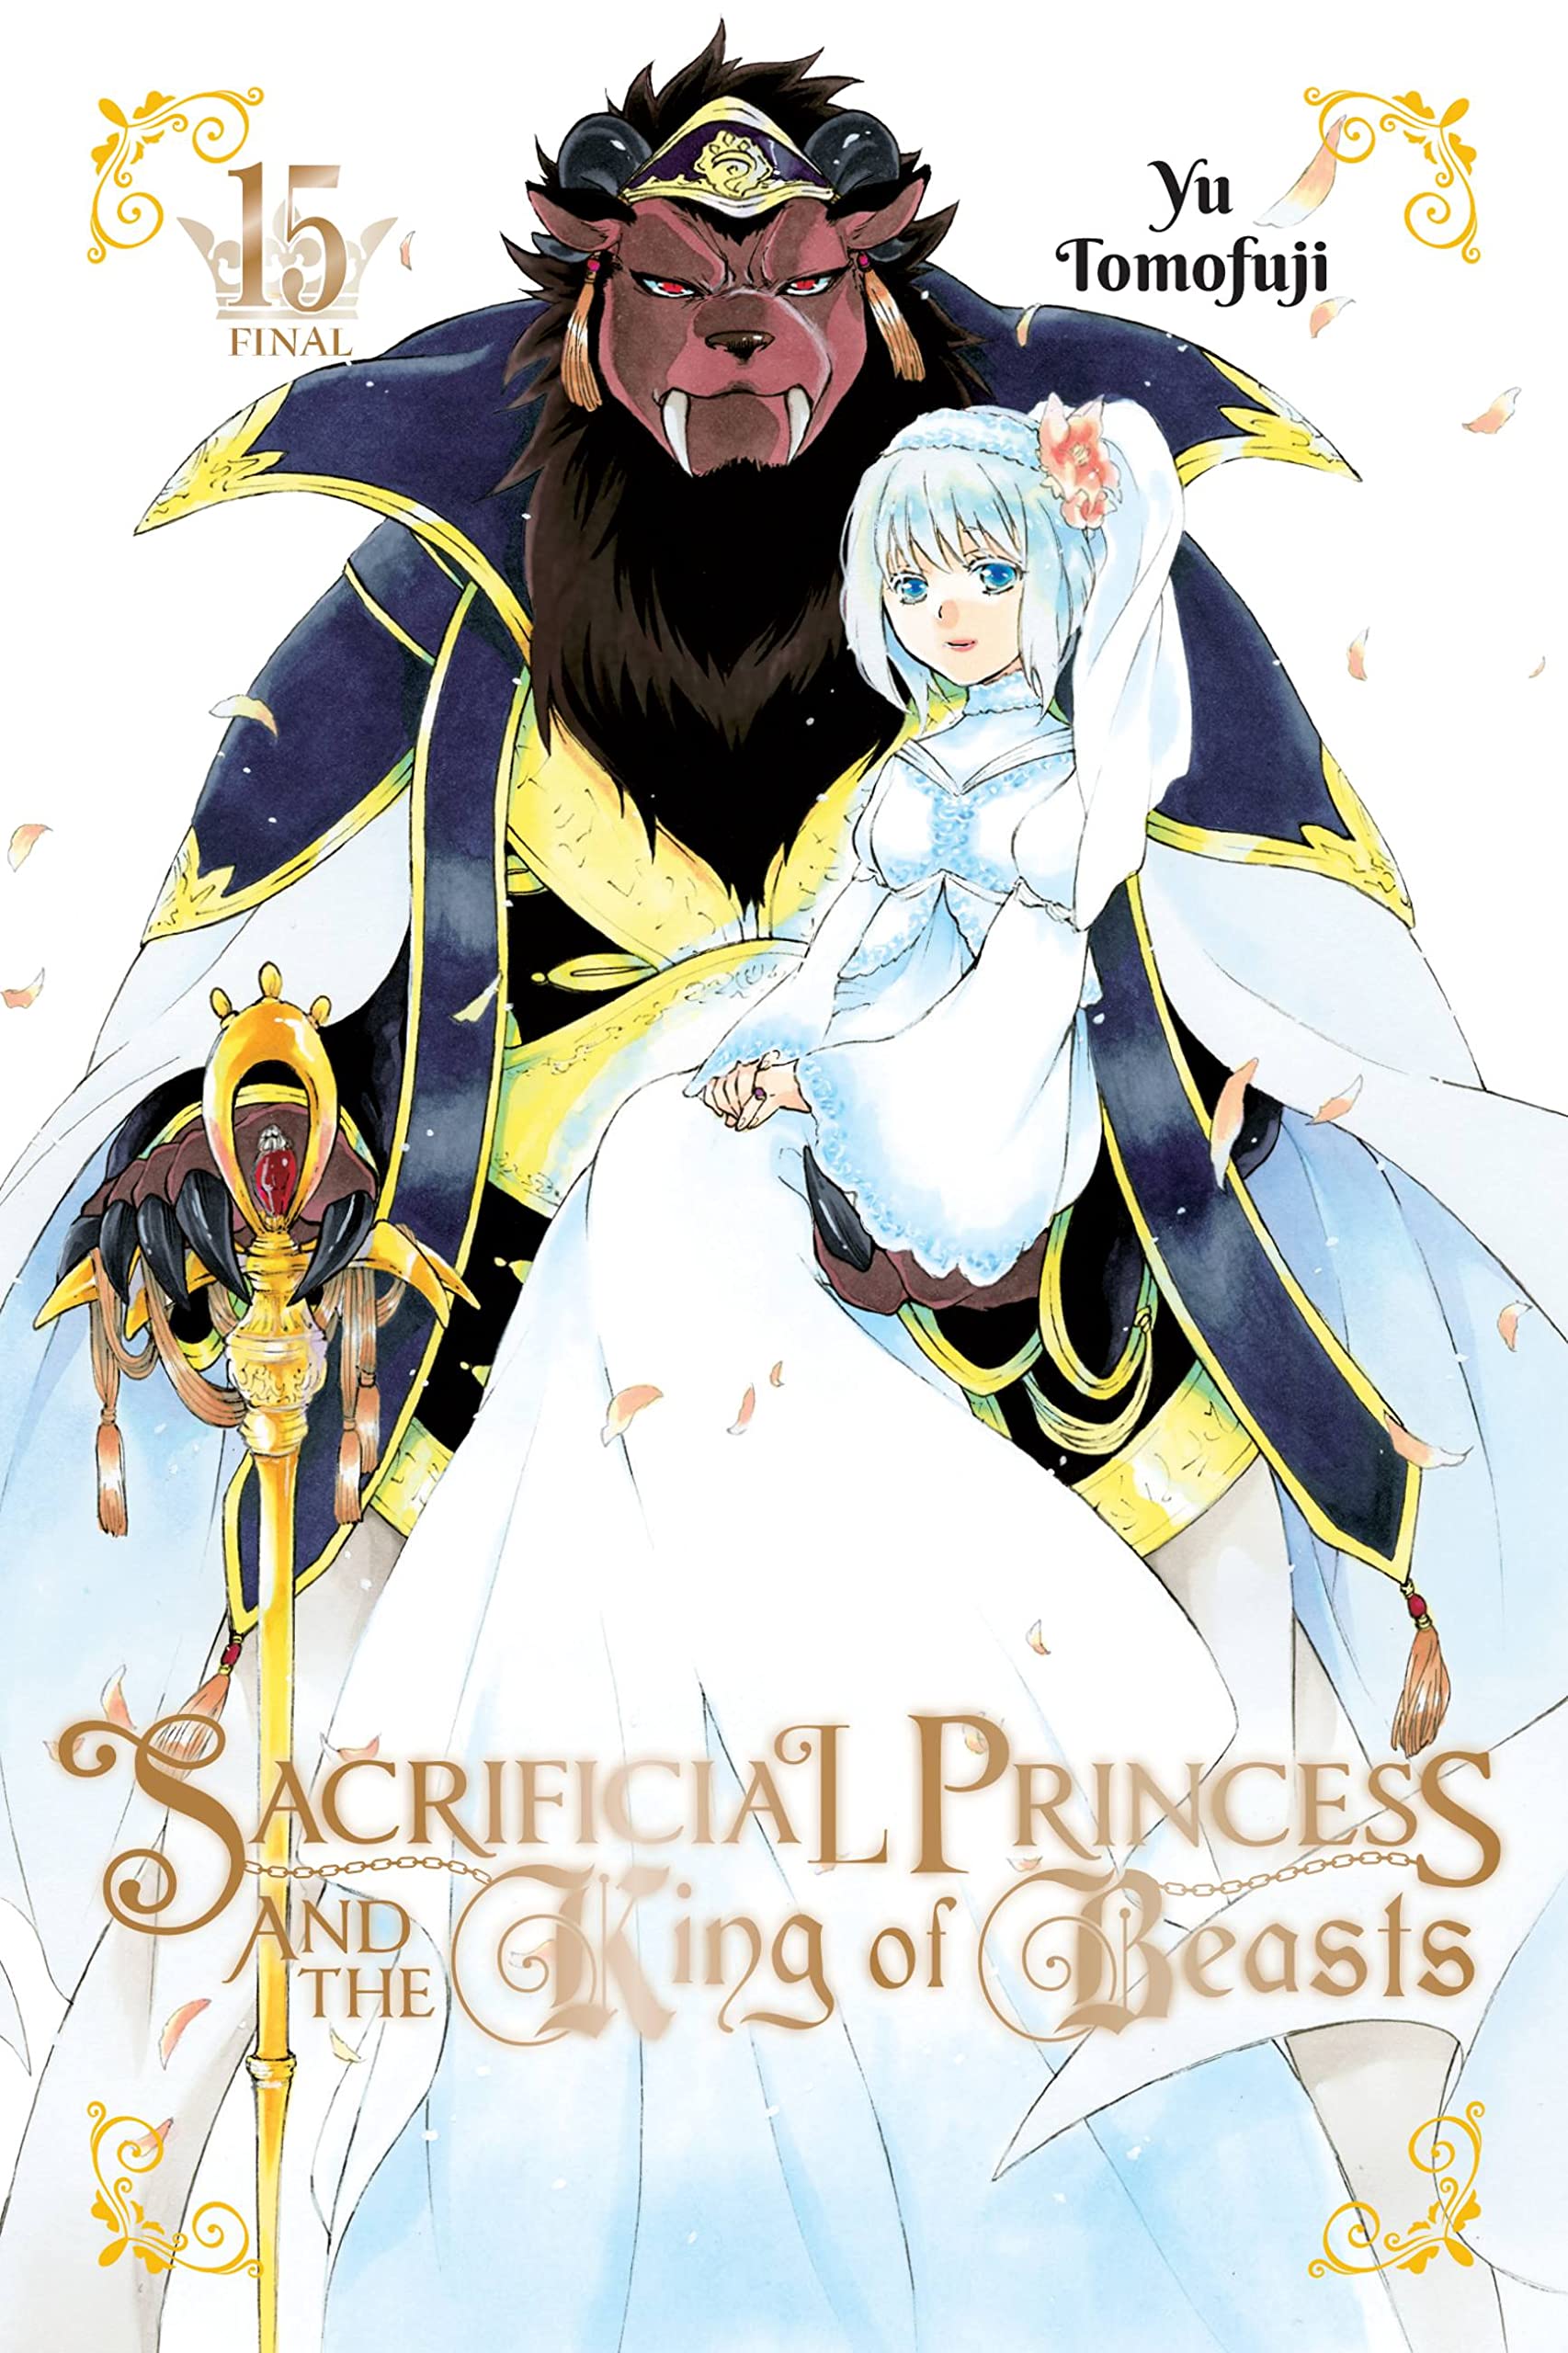 Chapter 72, Sacrificial Princess and the King of Beasts Wiki